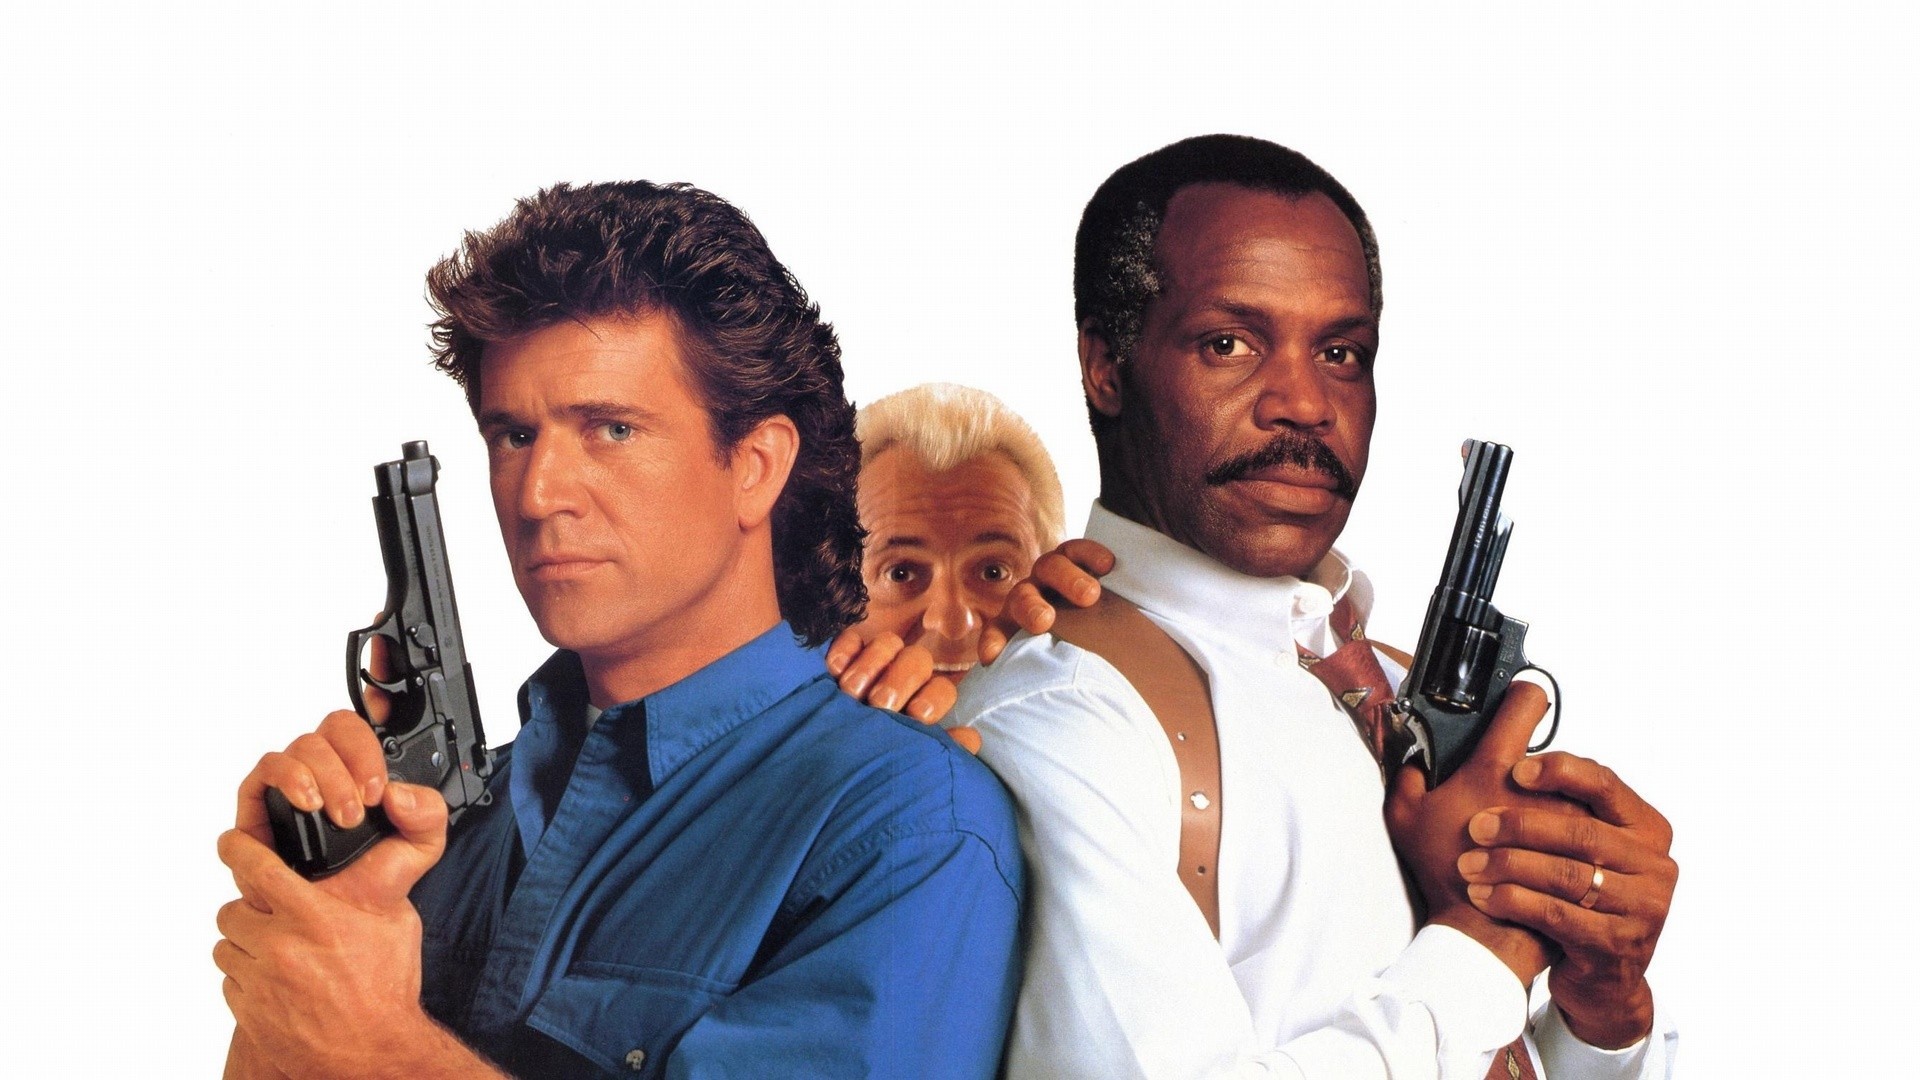 Lethal Weapon Posters Wallpaper Trailers Prime Movies